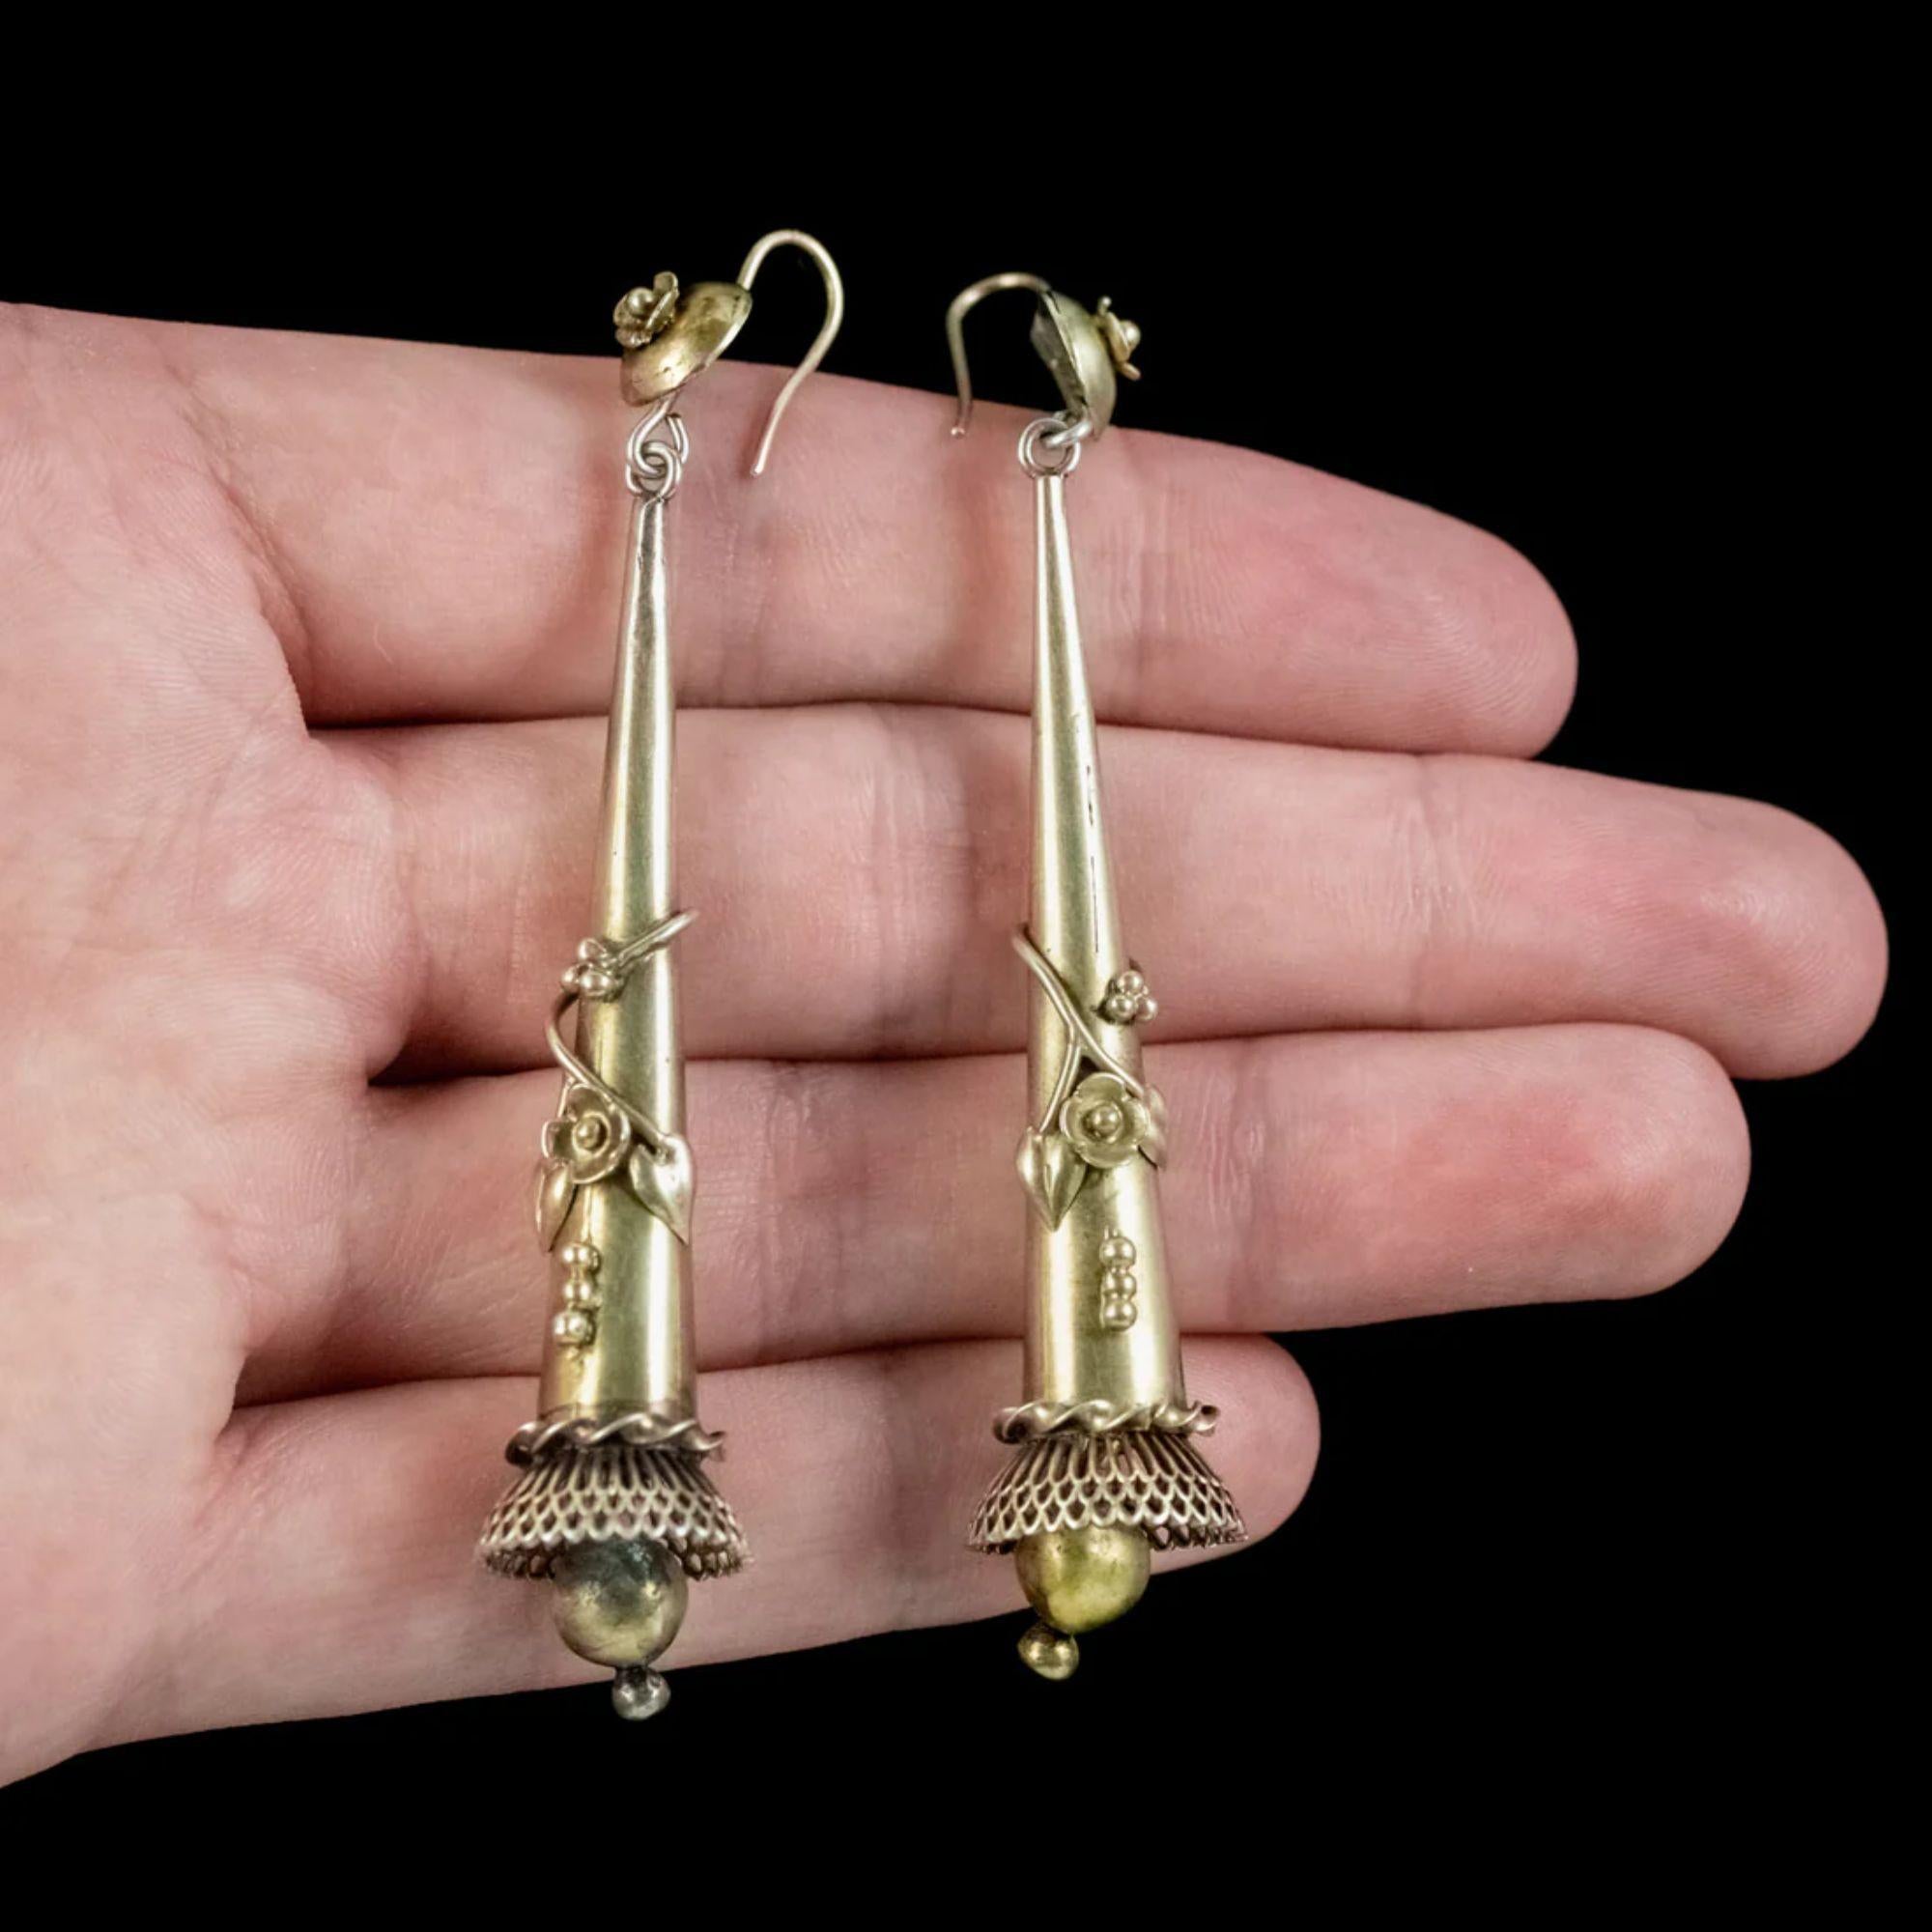 Antique Georgian Pinchbeck Floral Earrings, circa 1820 For Sale 2